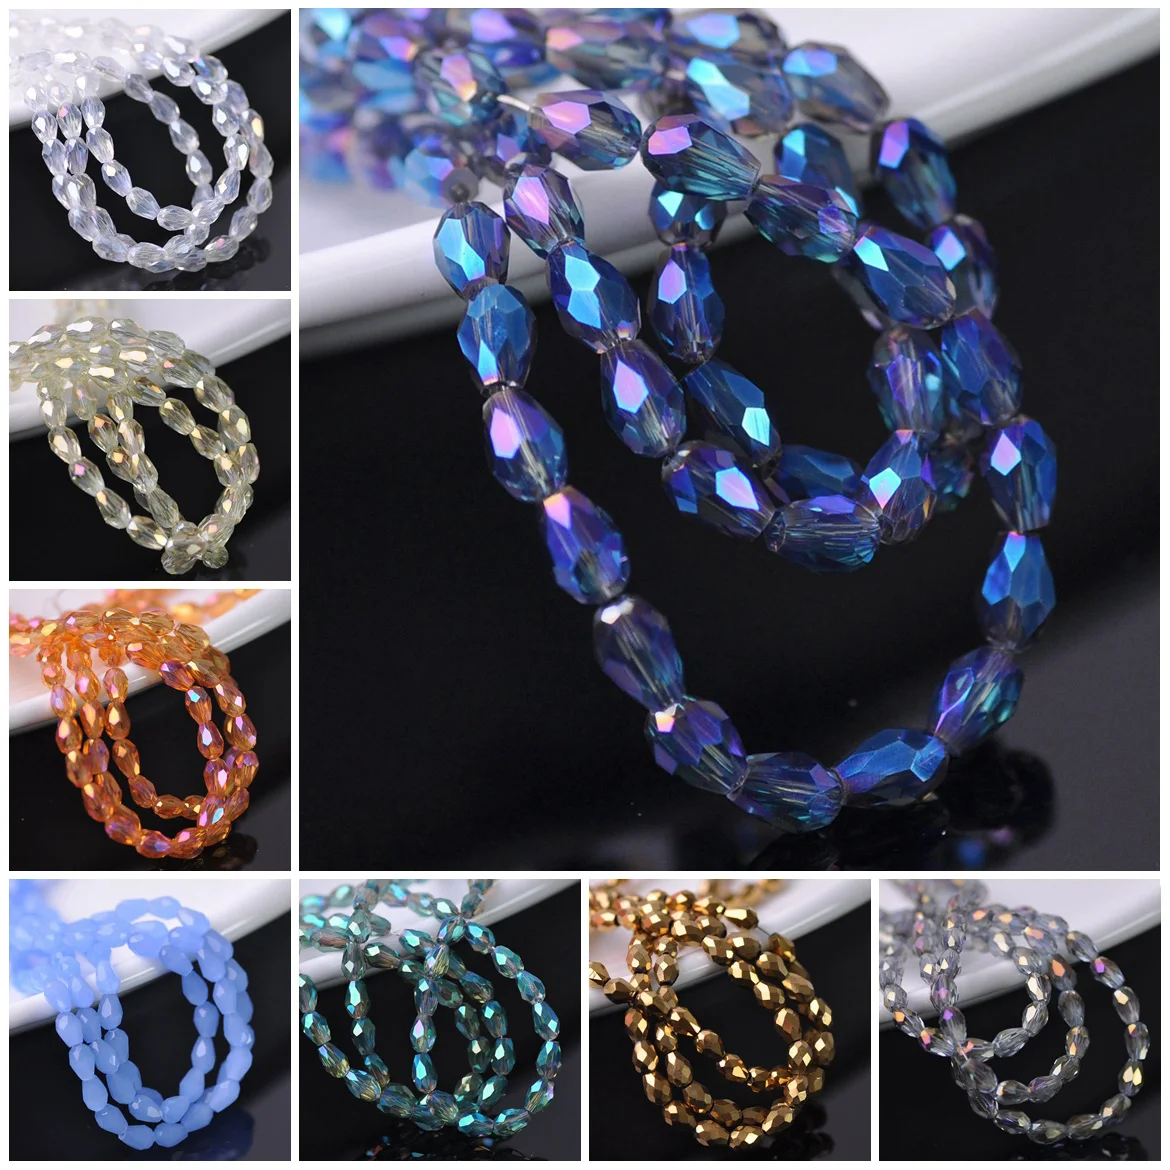 

50pcs Small Teardrop Shape 6x4mm Faceted Crystal Glass Loose Spacer Beads Lot For Jewelry Making DIY Crafts Findings